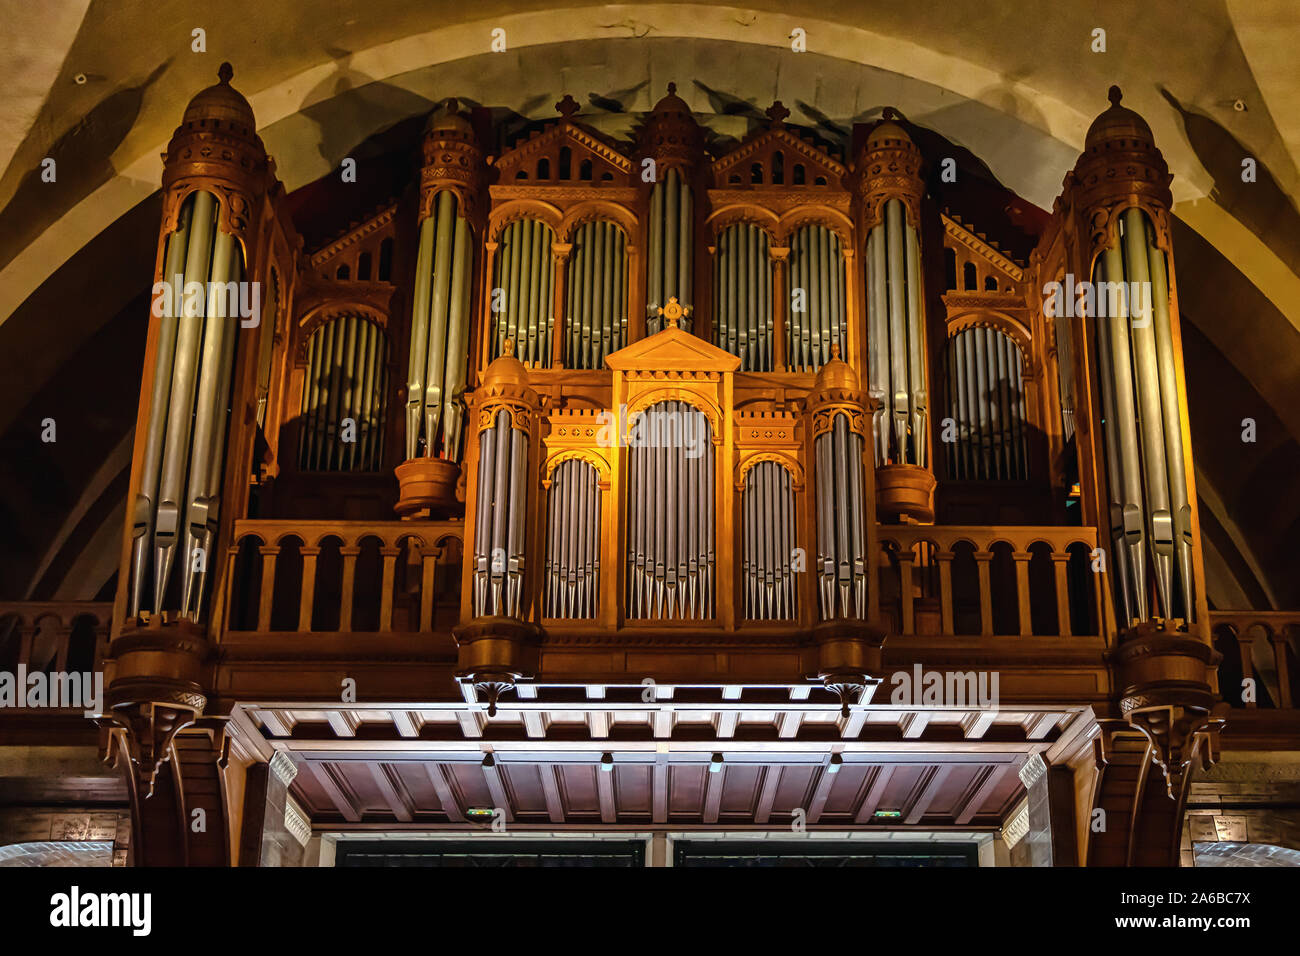 LOURDES, FRANCE - JUNE 15, 2019:  Interior view of the massive pipe organ inside the Rosary Basilica in Lourdes. Stock Photo